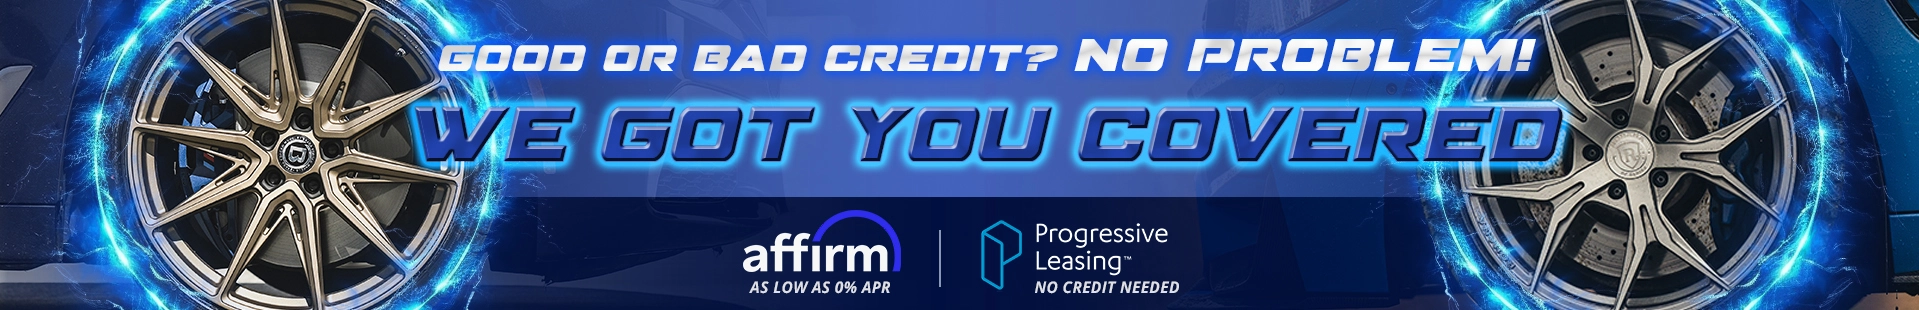 Financing for any credit score